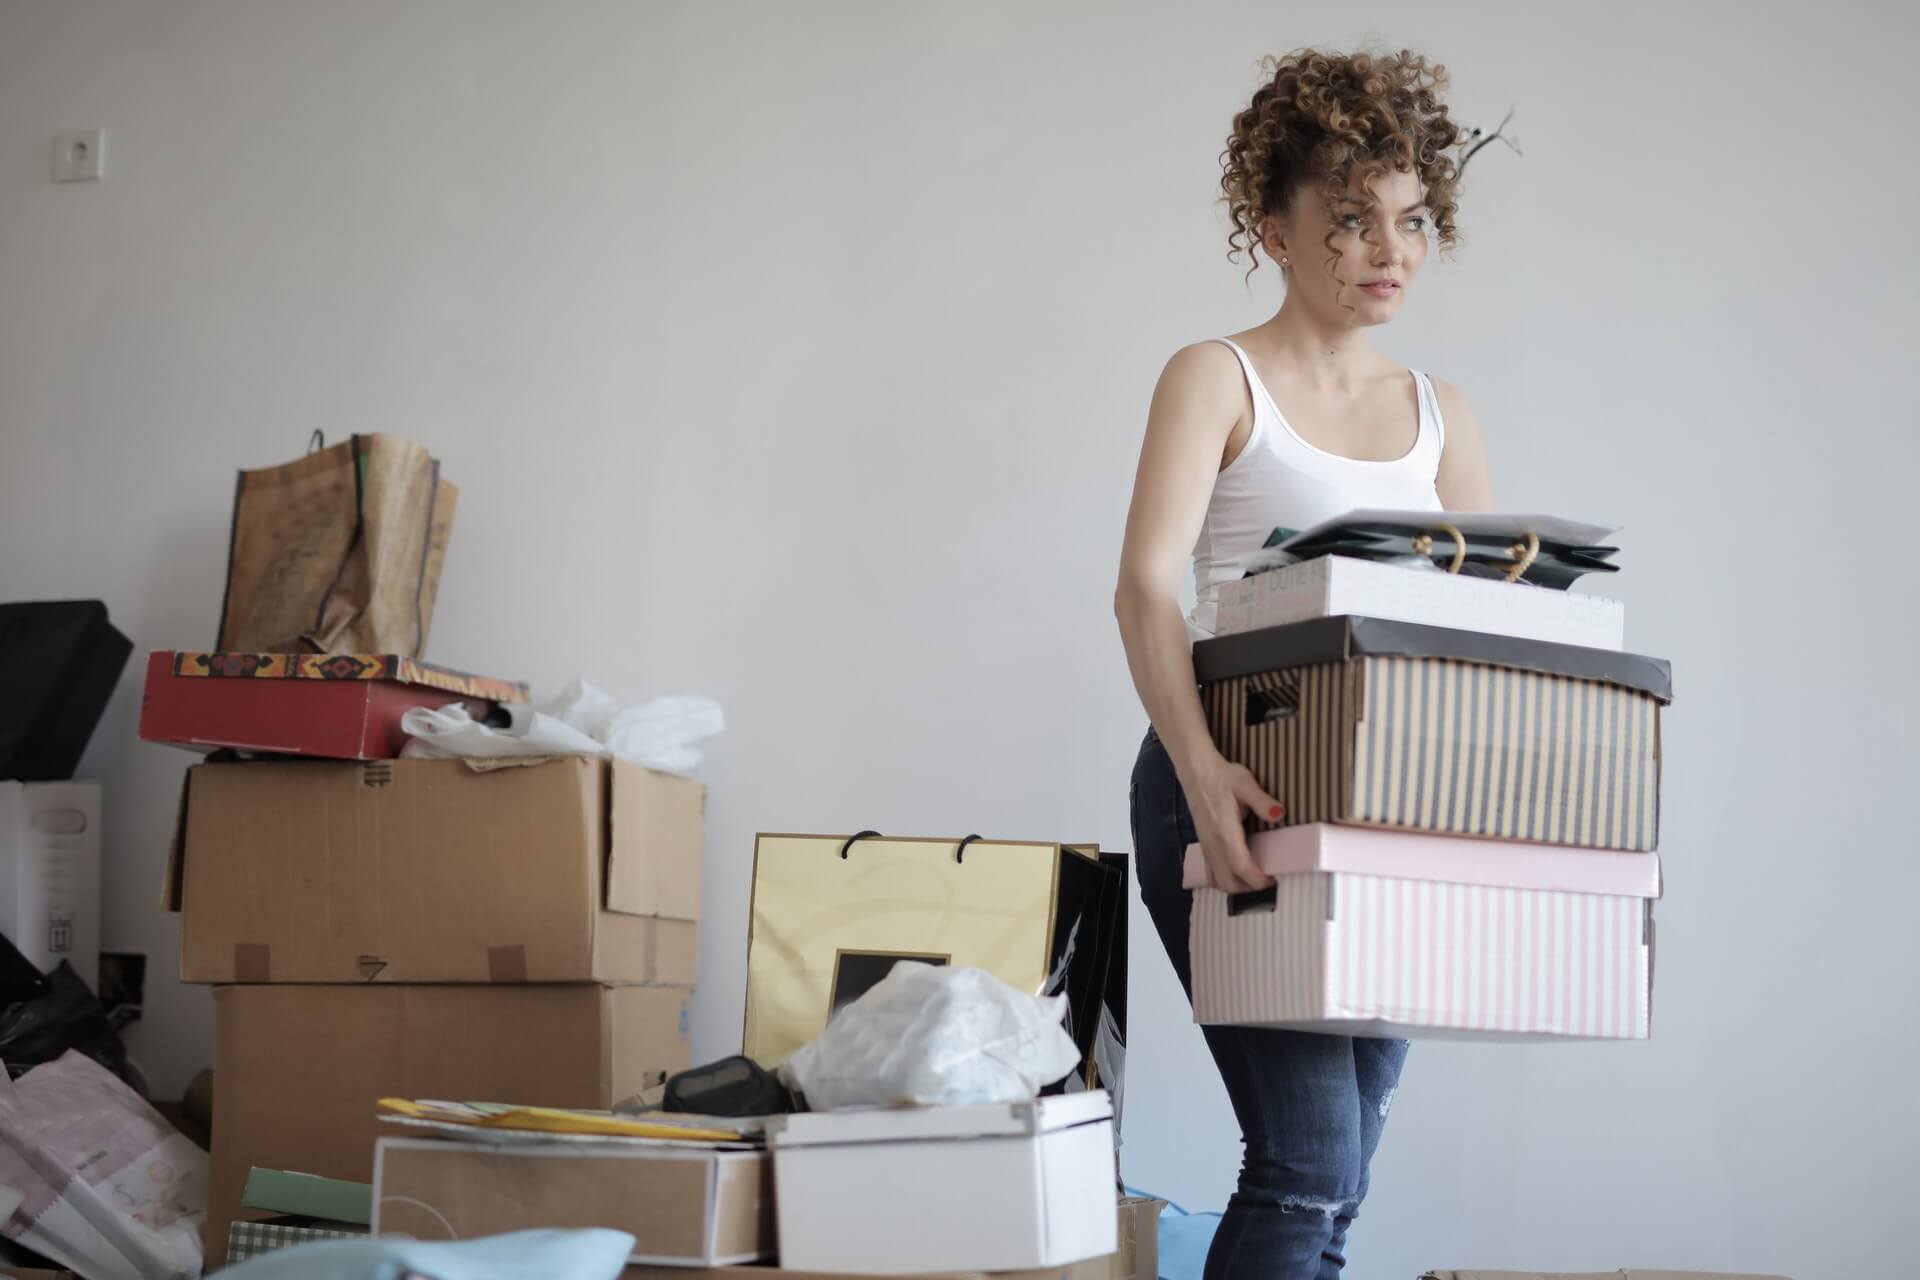 Ways To Make Your Home Look Good After Downsizing. The young woman with boxes